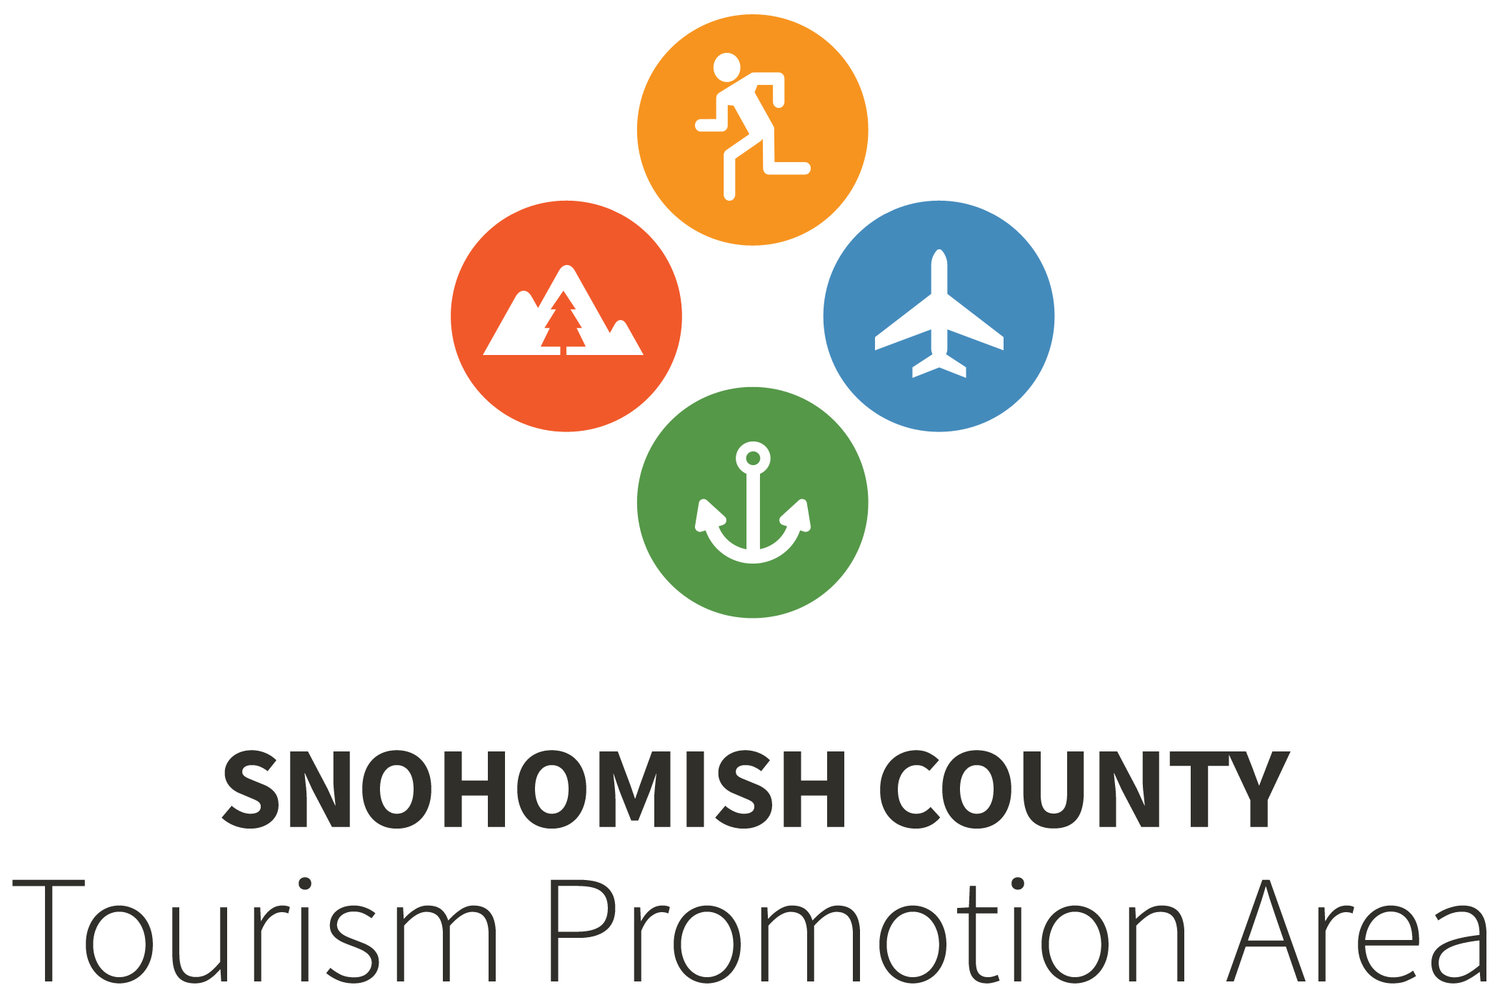 Snohomish County Tourism Promotion Area (TPA)